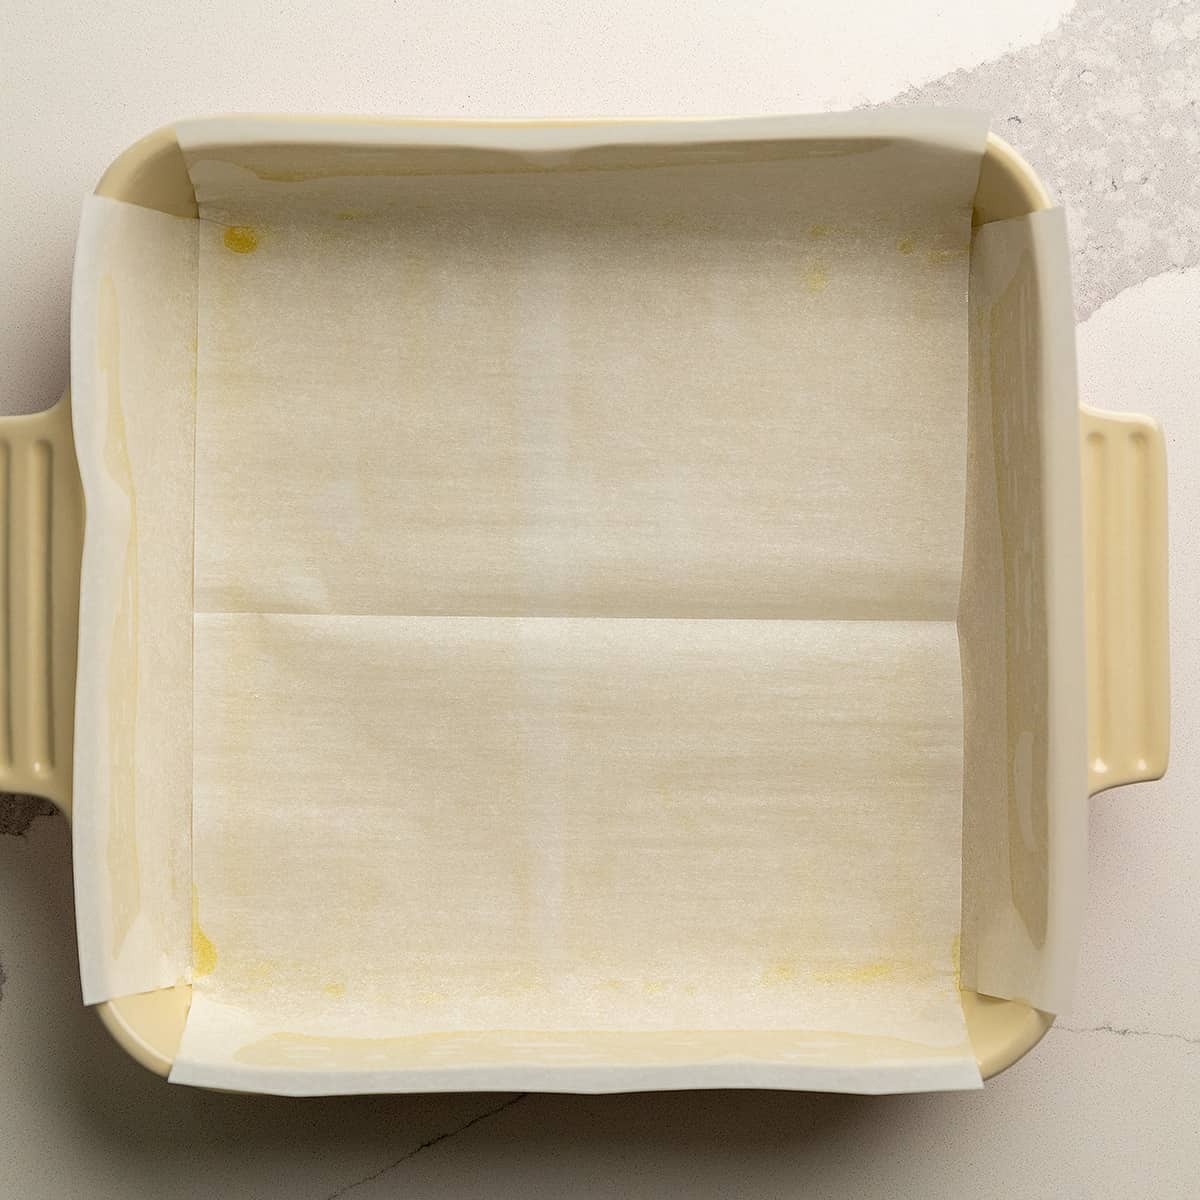 cake pan lined with parchment paper